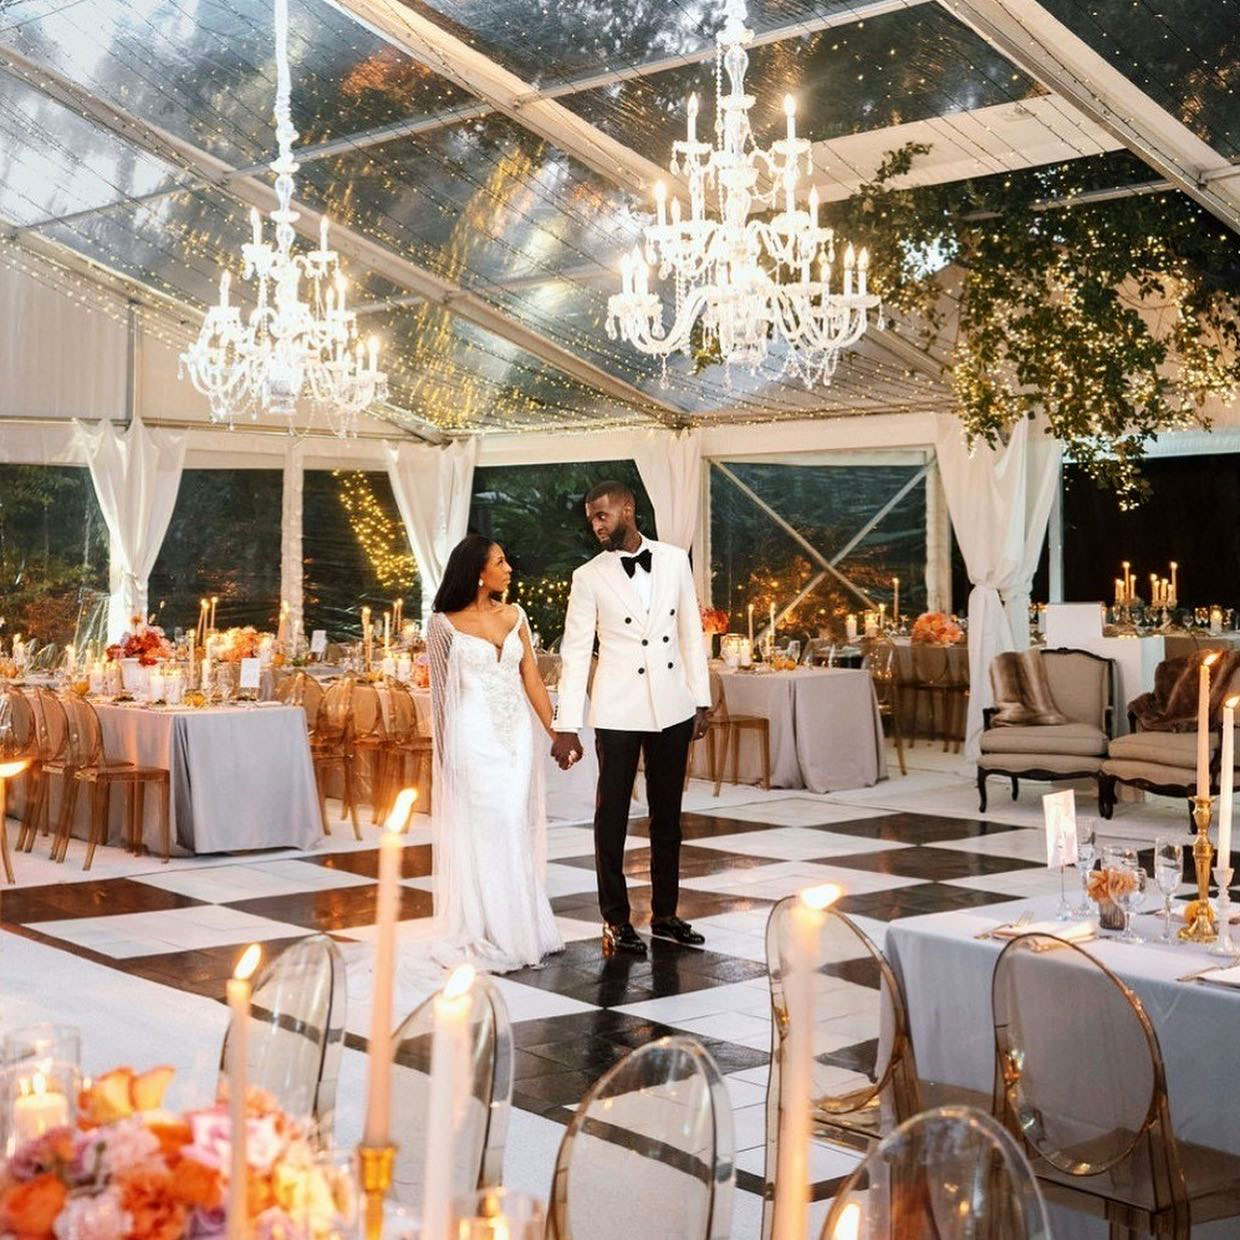 Couple standing on slate black and slate white dance floor in tent wedding space with chandeliers